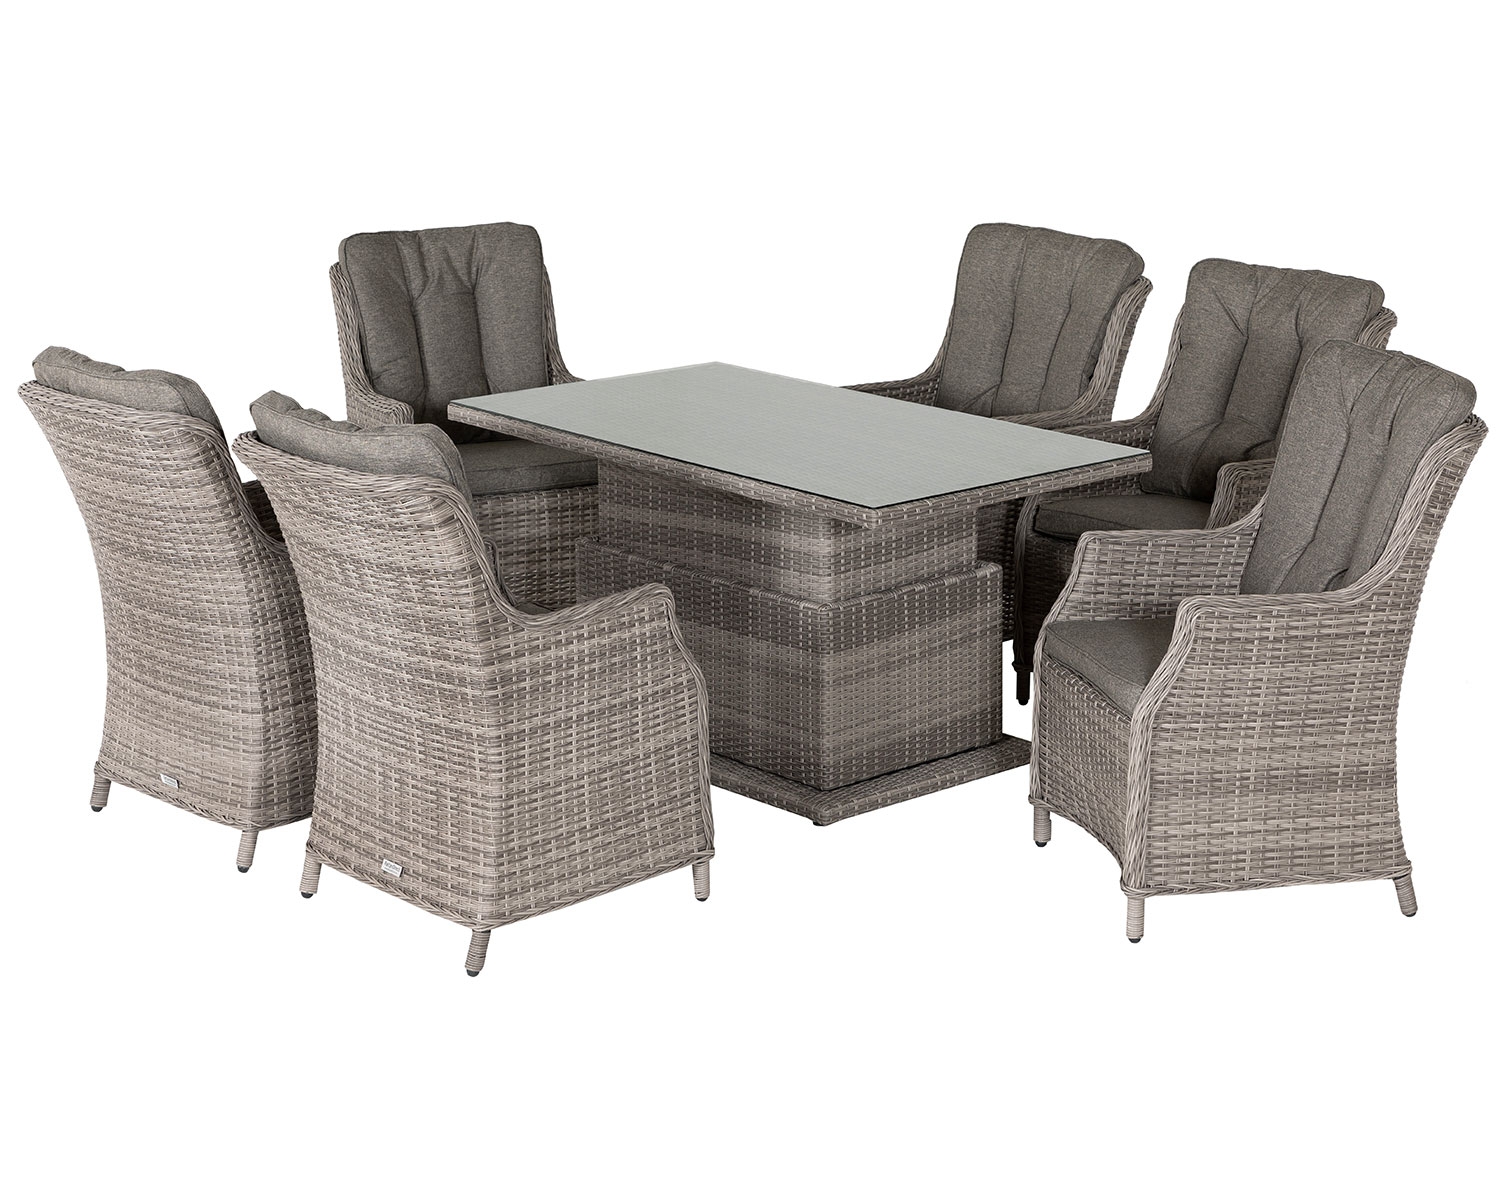 6 Seat Rattan Garden Dining Set With Adjustable Height Table in Grey